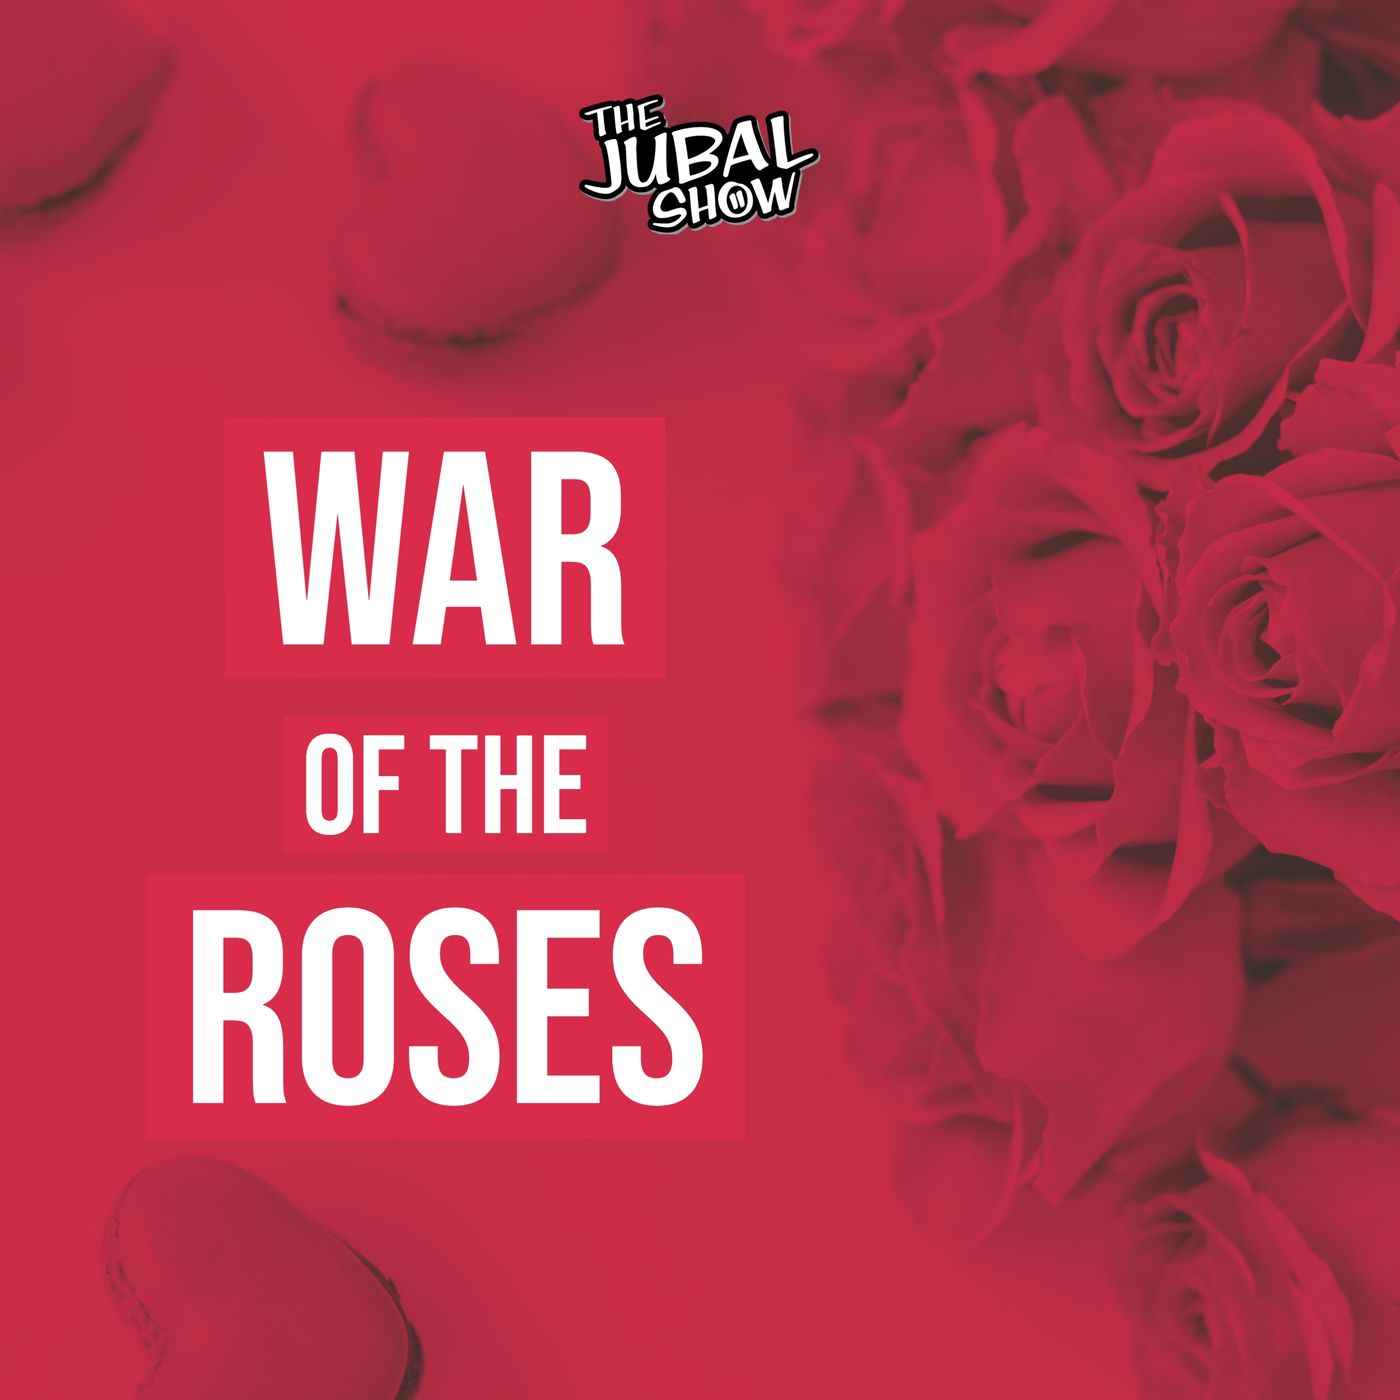 There's a rewards club for everything in this War of the Roses!